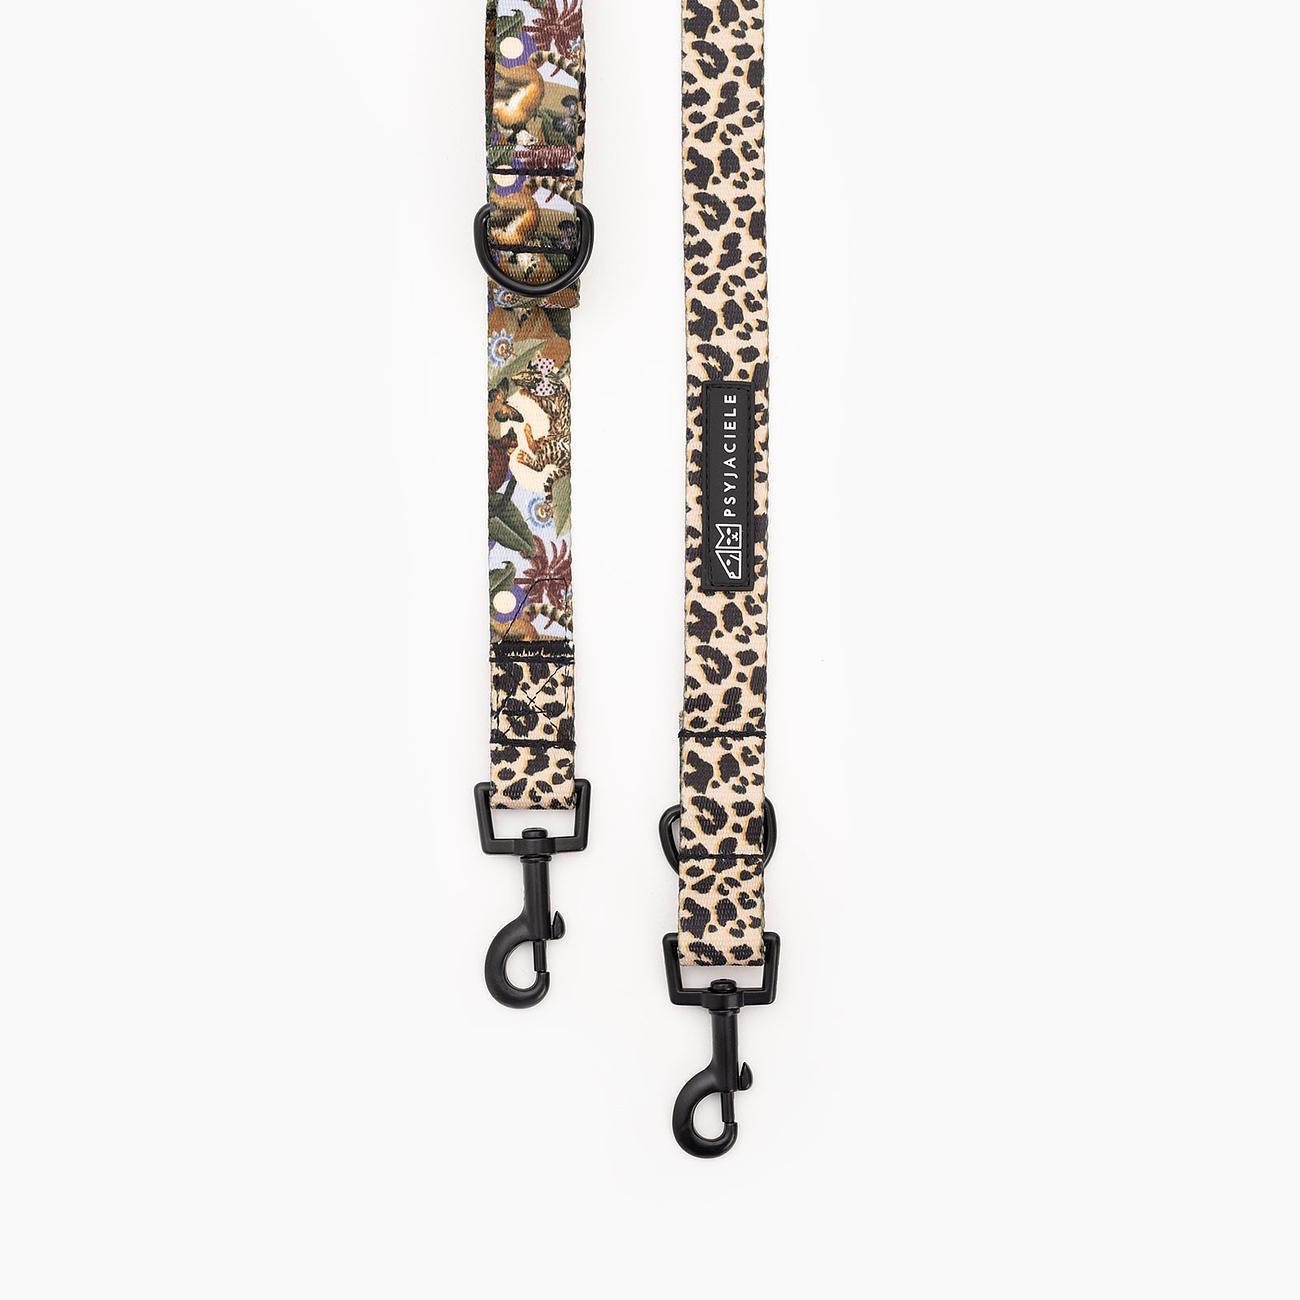 Adjustable leash "Respect the wildness" 